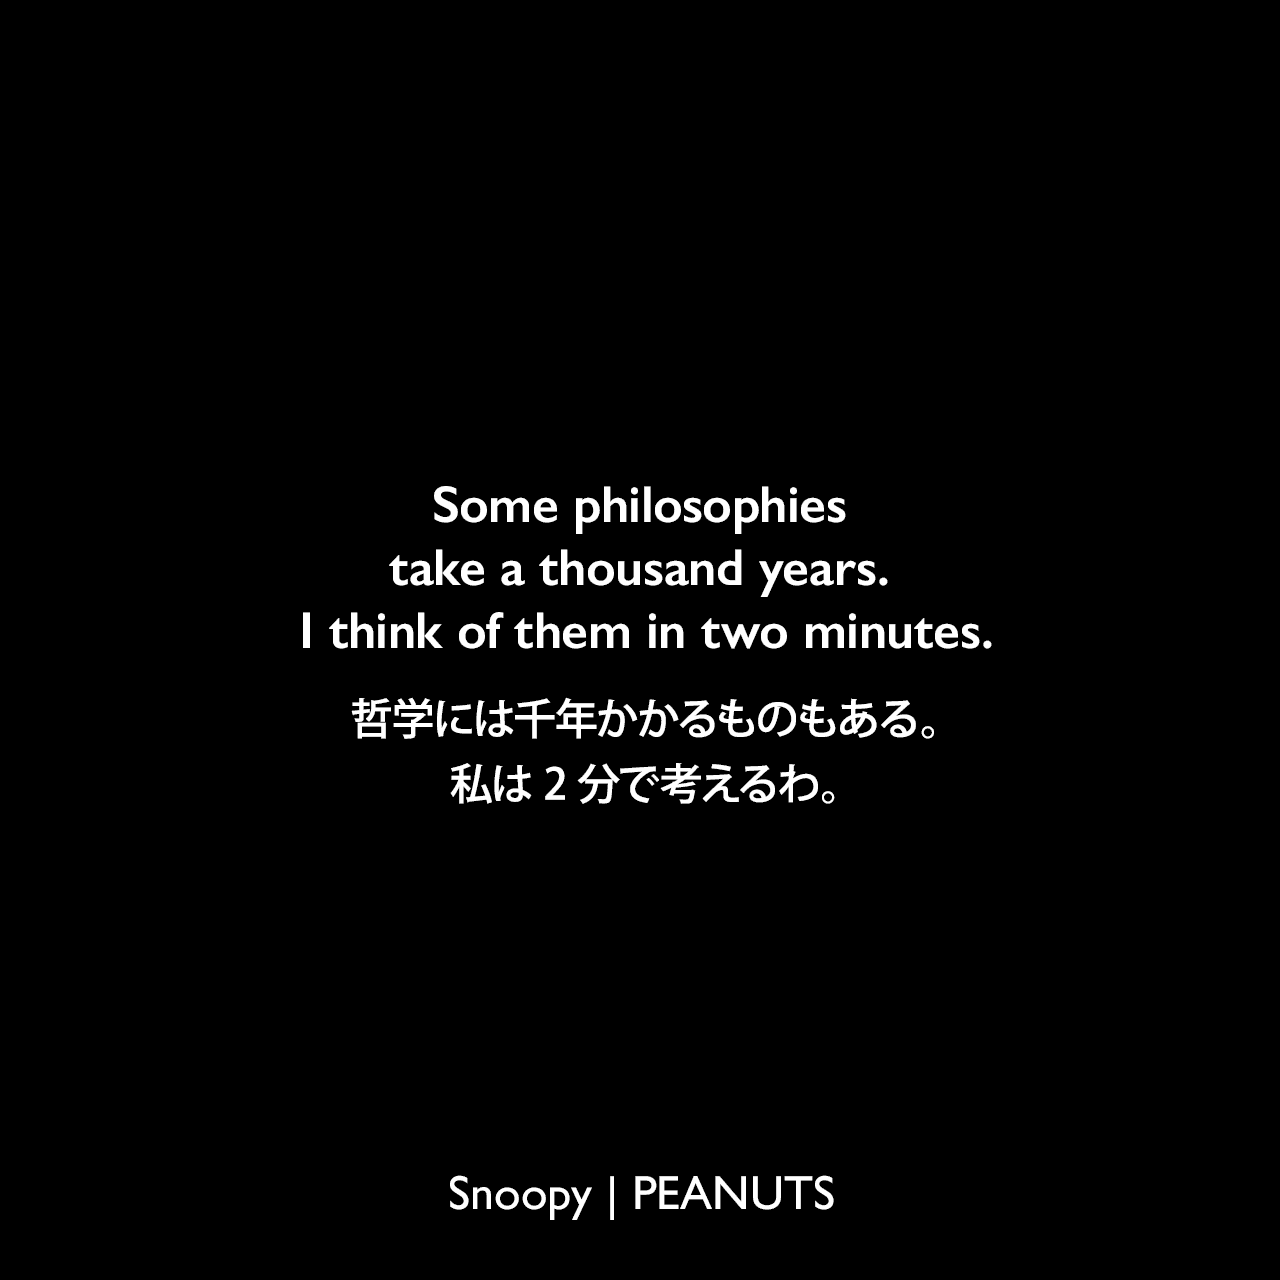 Some philosophies take a thousand years. I think of them in two minutes.哲学には千年かかるものもある。私は2分で考えるわ。- サリー (1997年4月15日のコミック)Charles Monroe Schulz